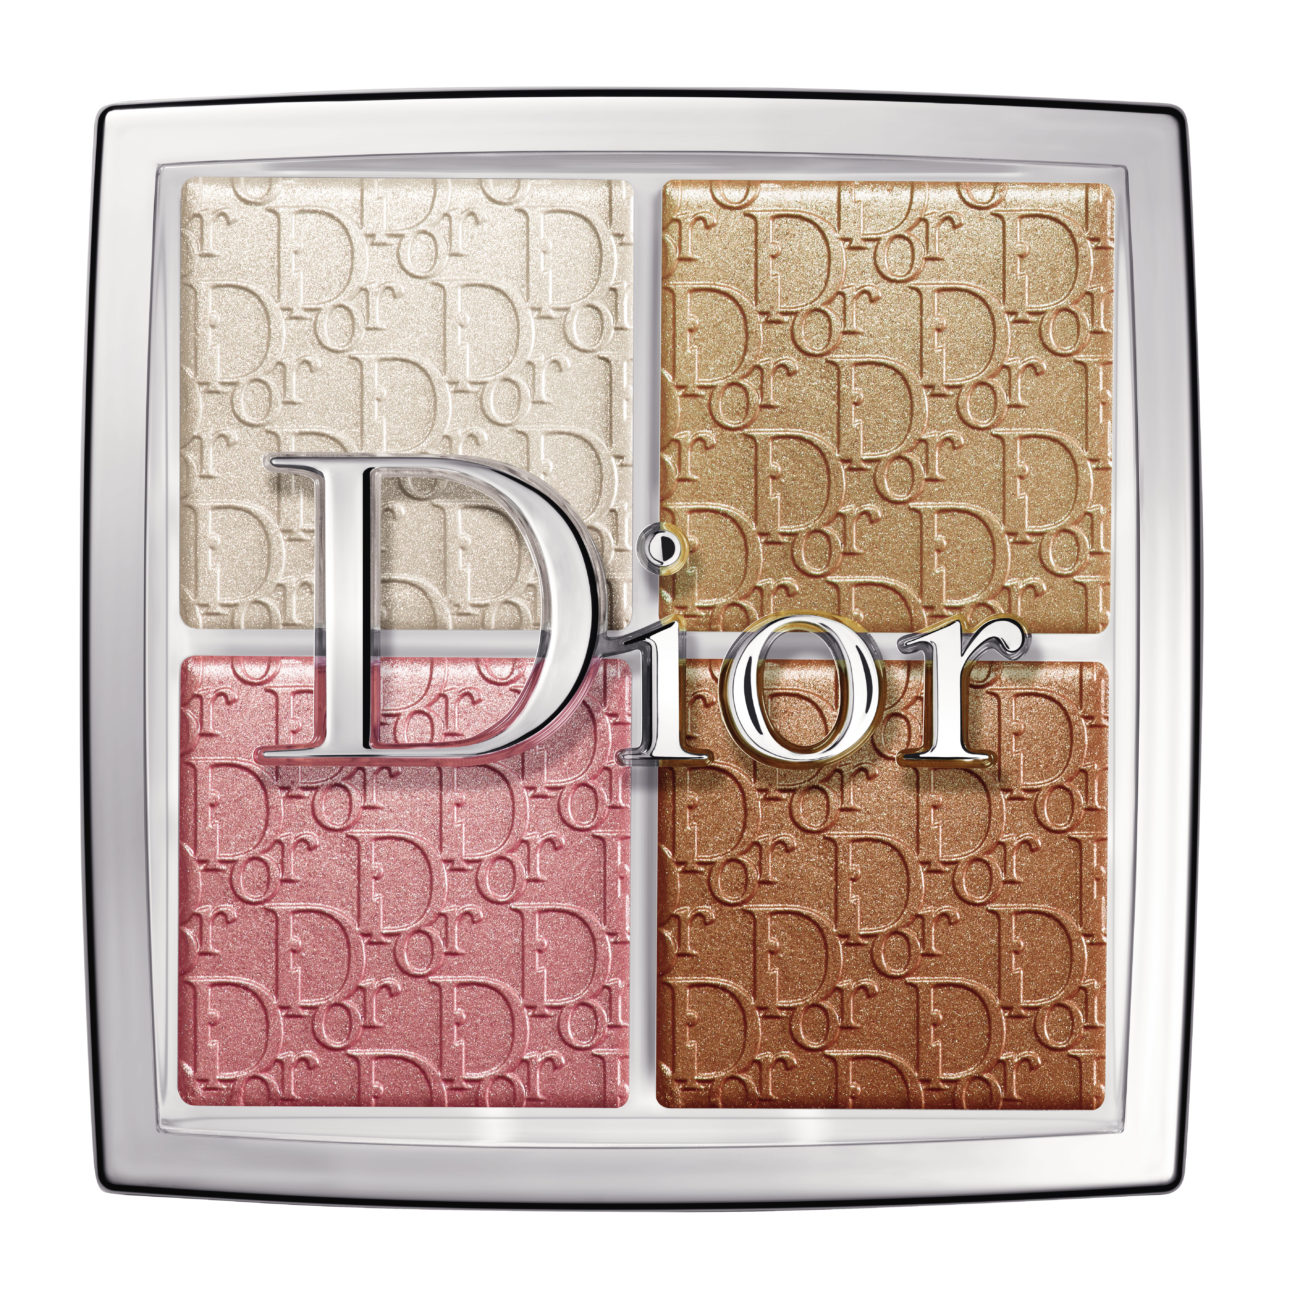 DIOR BACKSTAGE GLOW FACE PALETTE #001 UNIVERSAL